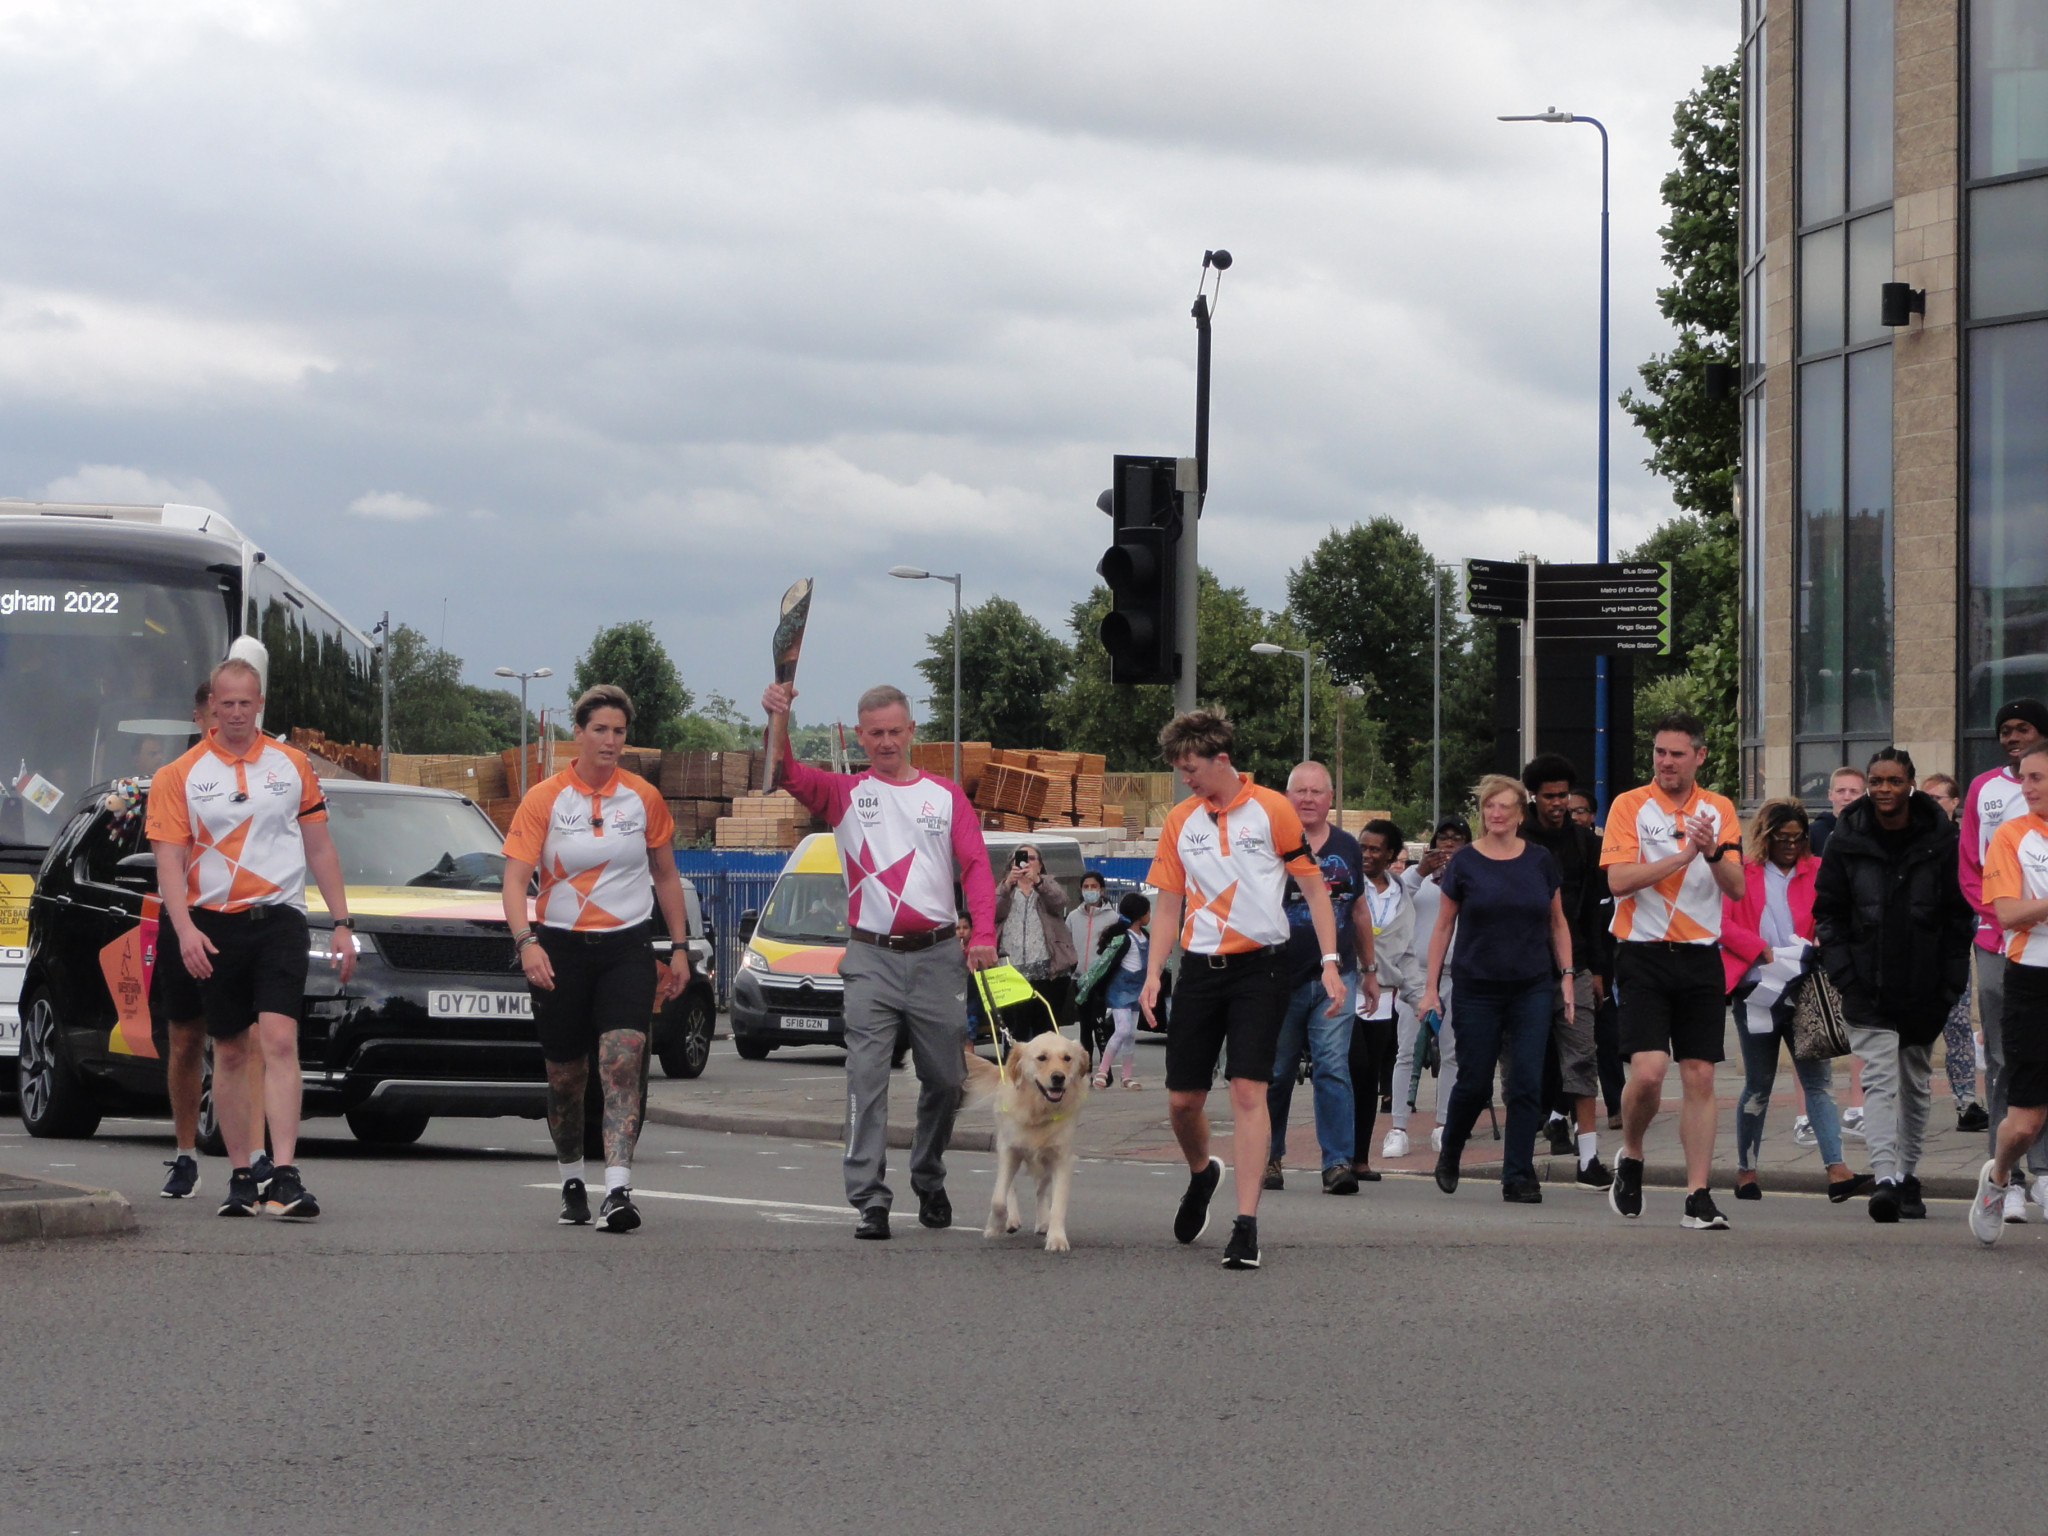 Dave Heeley carried the Baton with guide dog Peter in Sandwell ©ITG